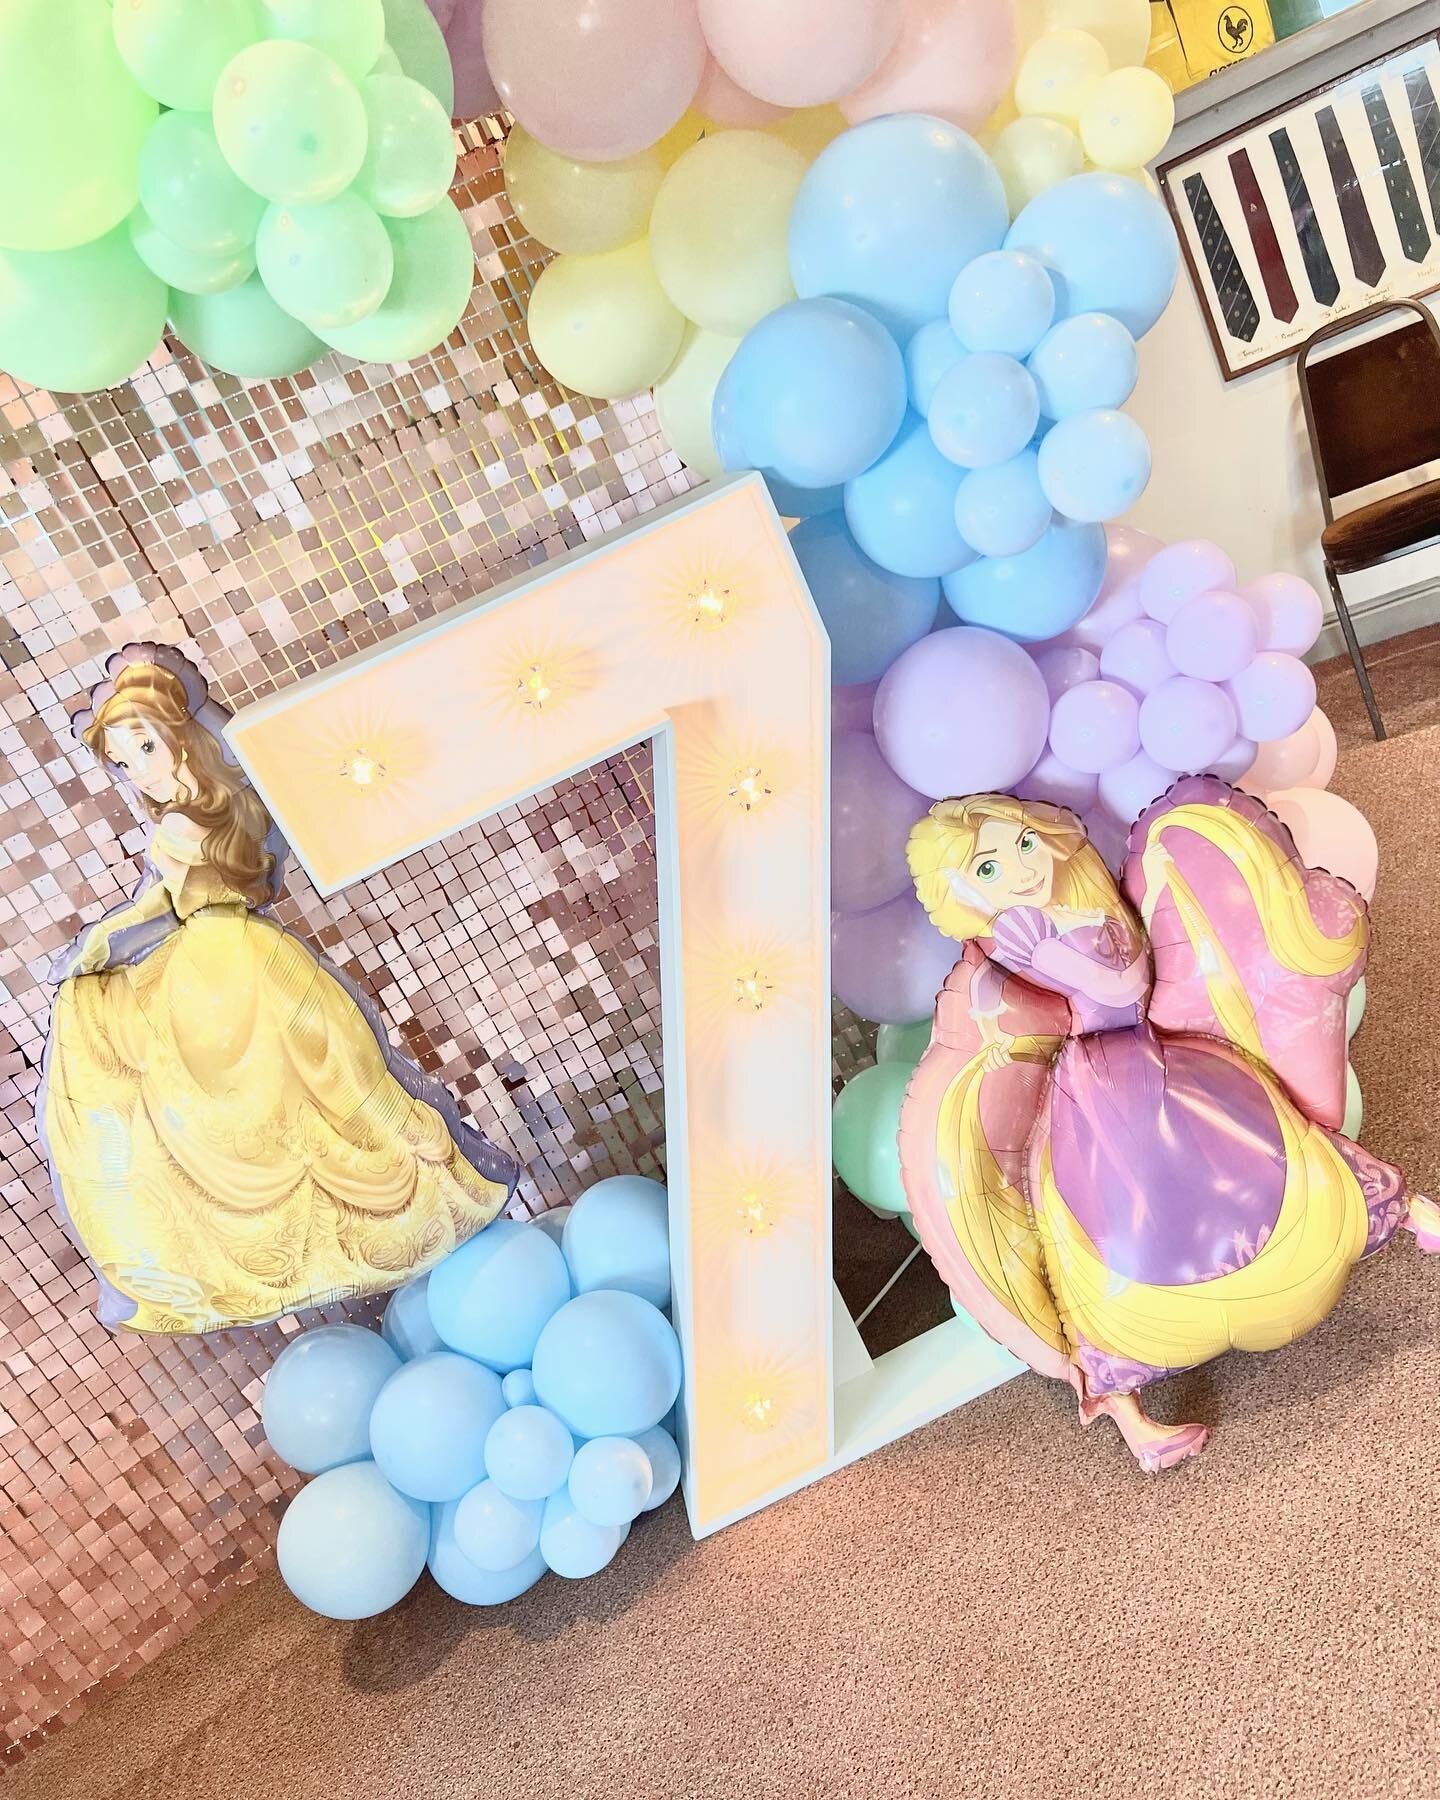 Making wishes come true. A very special setup for a special little girl with @makeawishuk 

Balloons, light up numbers and sequin wall all supplied by Partycraftballoons 

#makeawish #disney #disneyprincess #sequinwall #lightupnumbers #somerset #brid